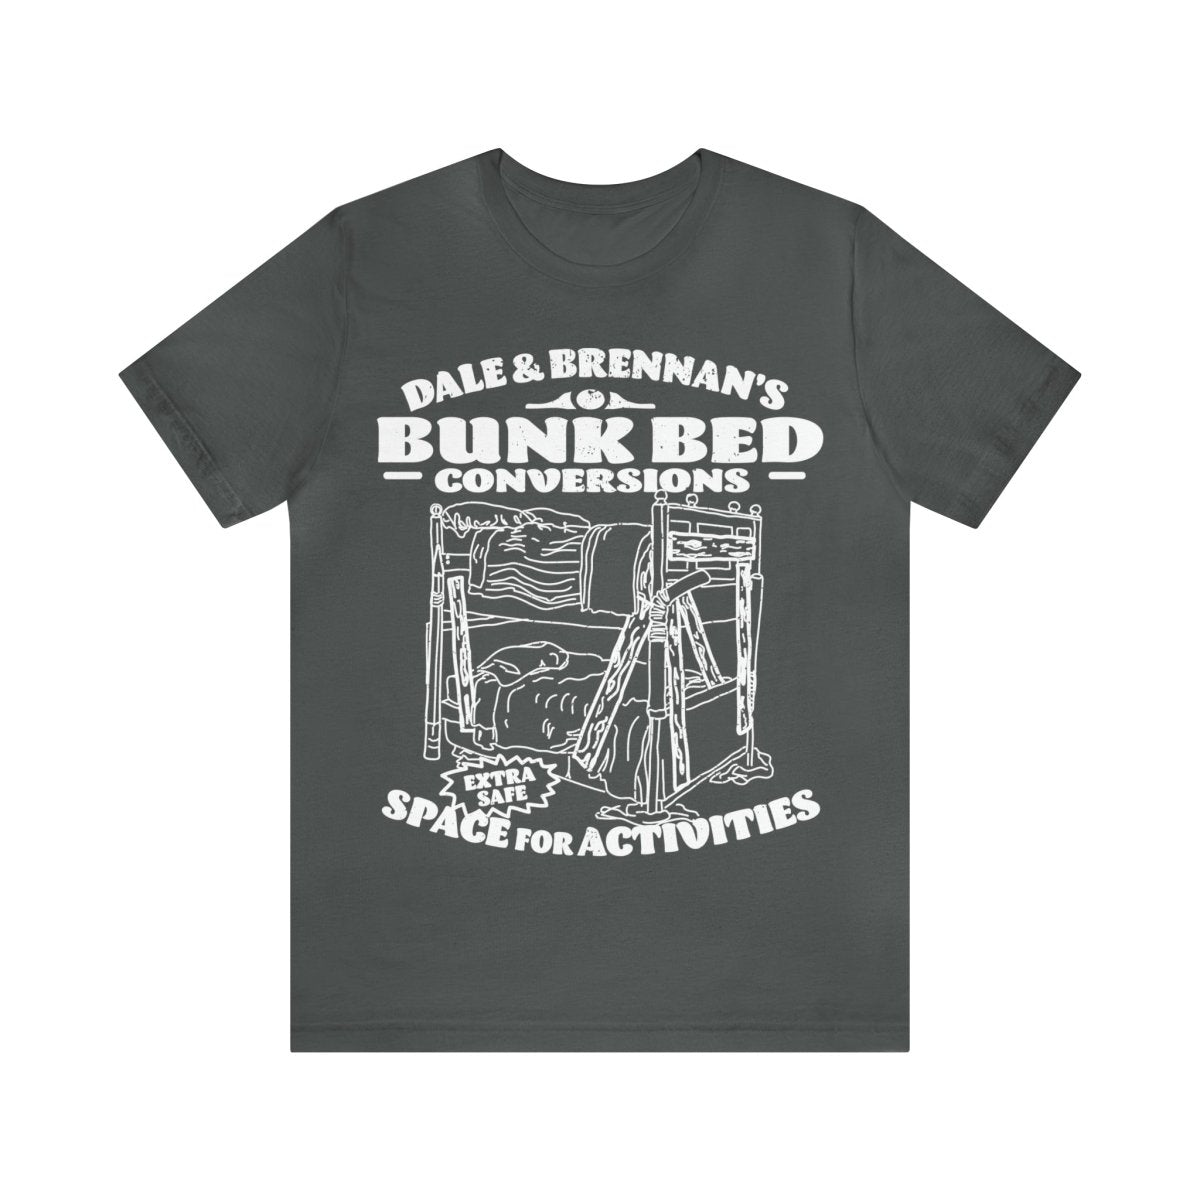 Dale & Brennan's Bunk Beds Conversion Premium T-Shirt, Activity Space, Funny